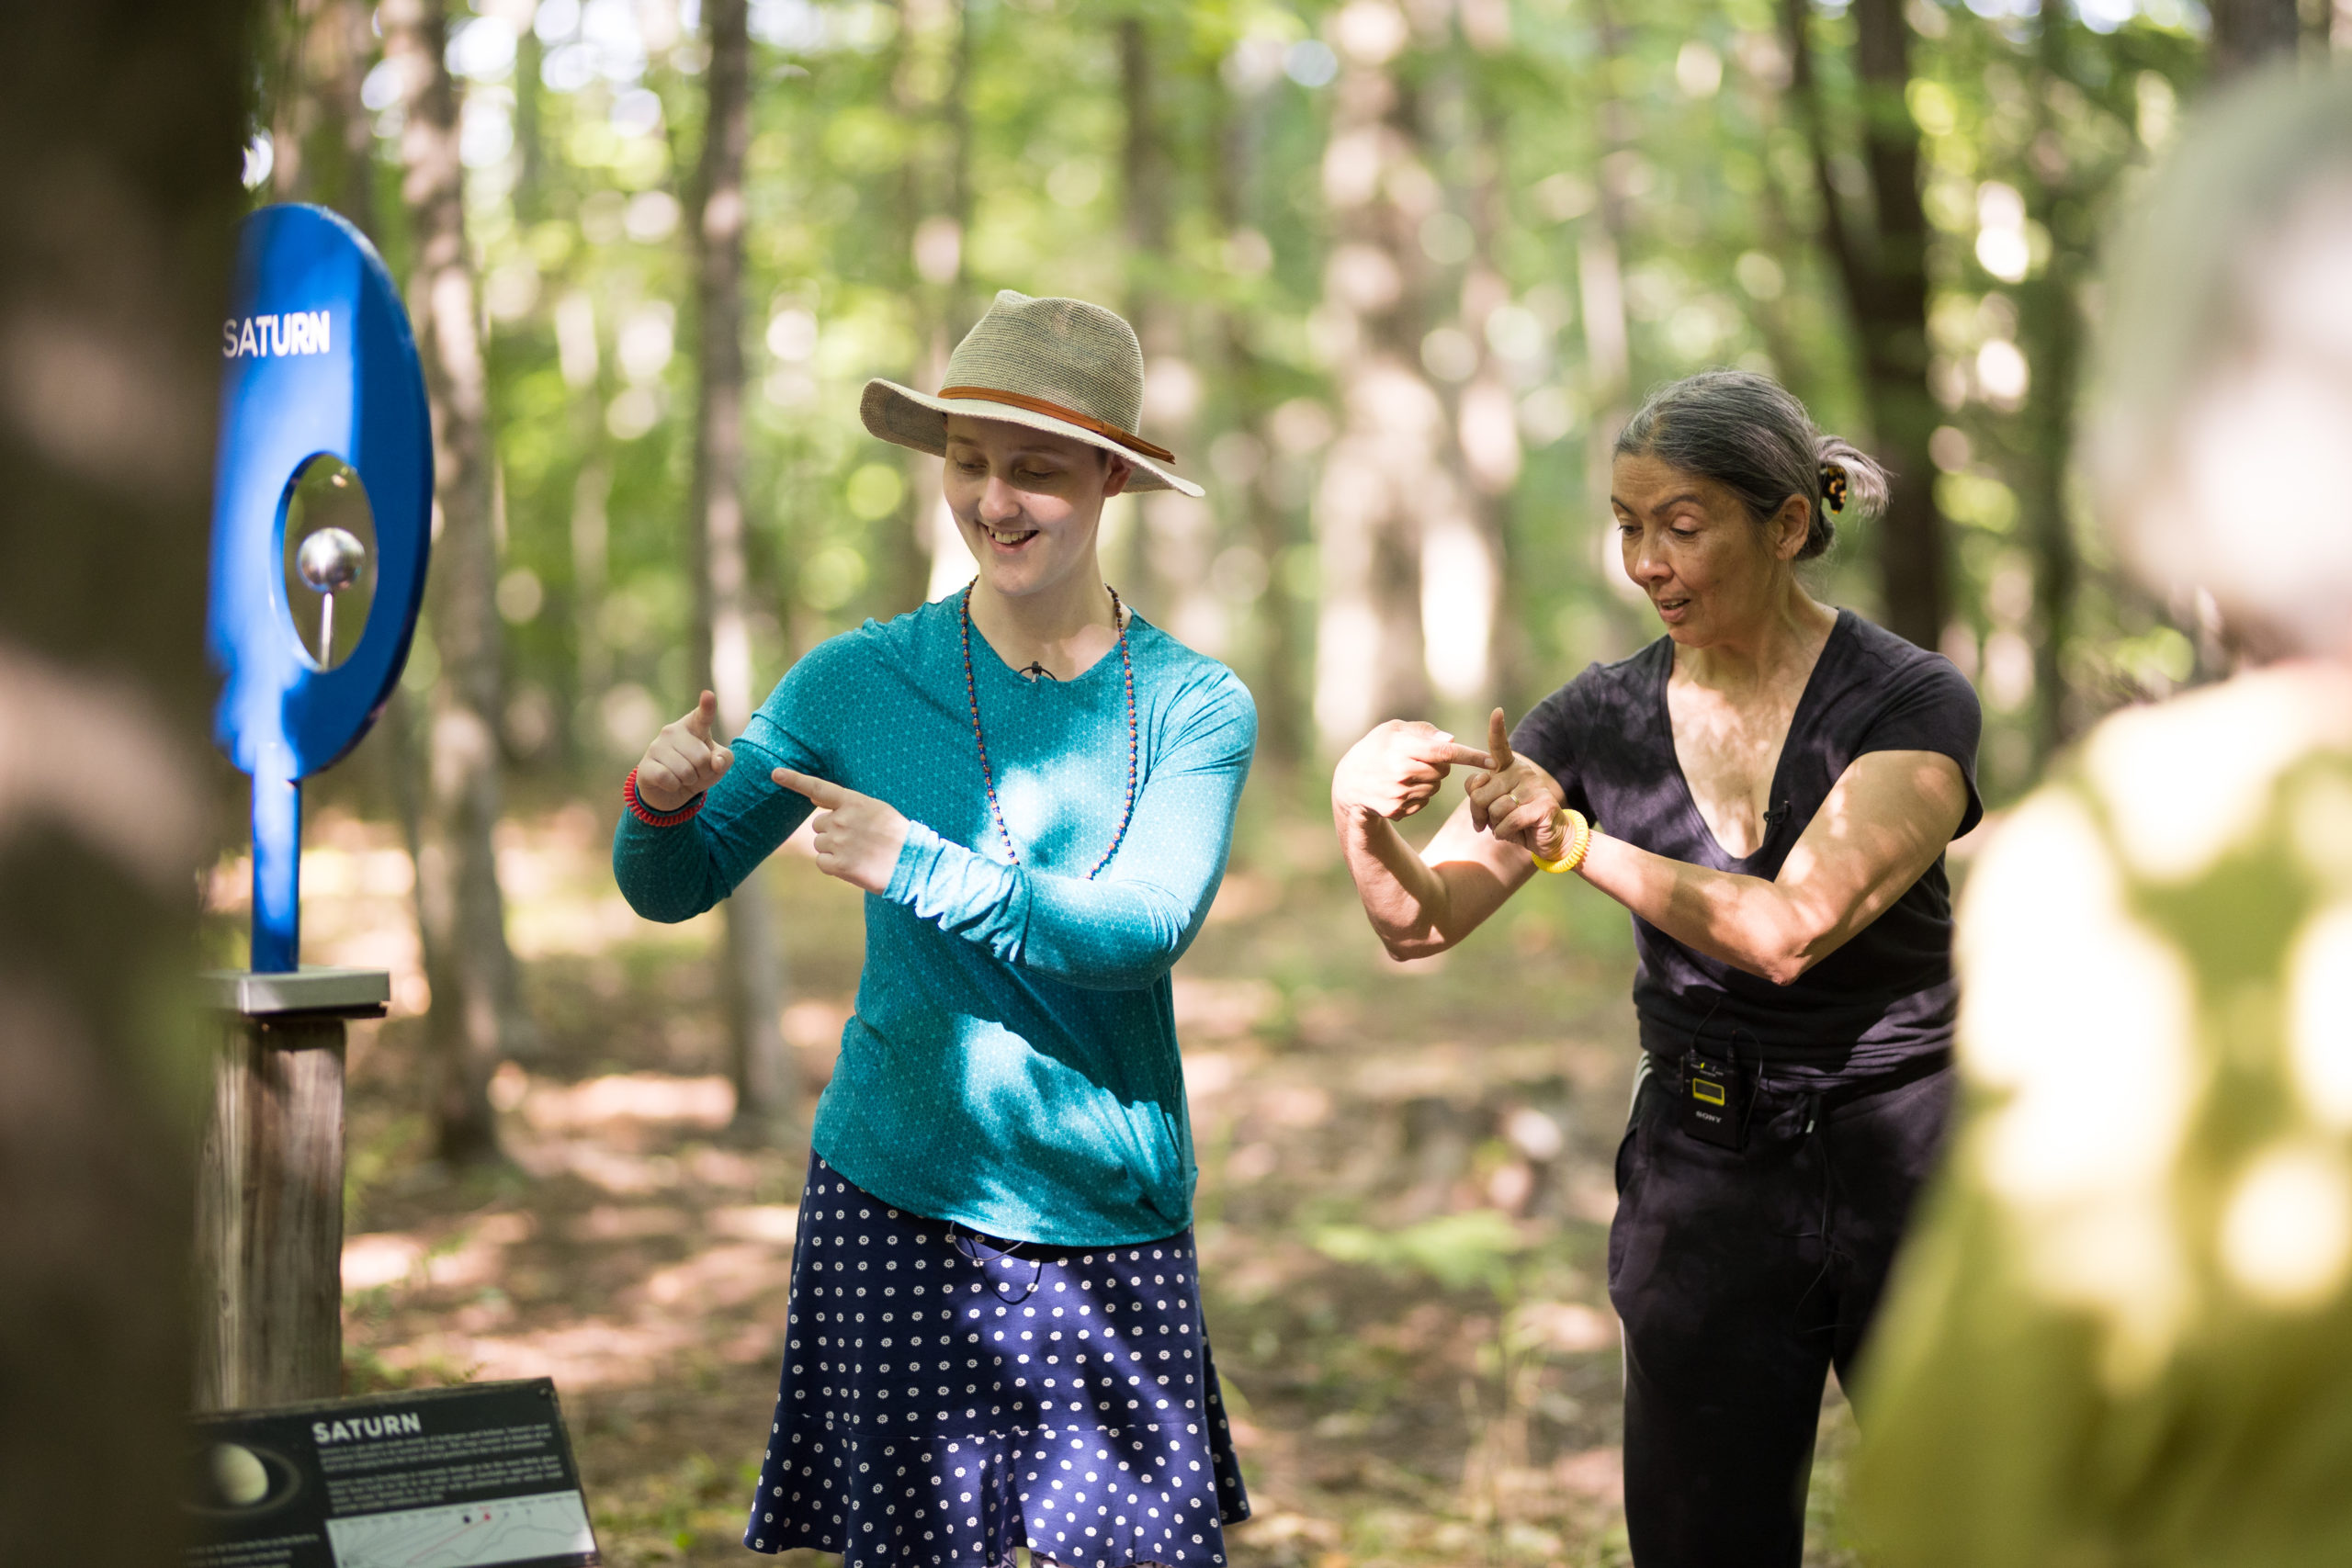 Standing in the woods during a Big Move at the Hop event, Emmanuèle Phuon speaks as she looks to where she is bringing her pointer fingers together. A woman in bright street clothes and a hat smiles as she imitates the gesture beside her.